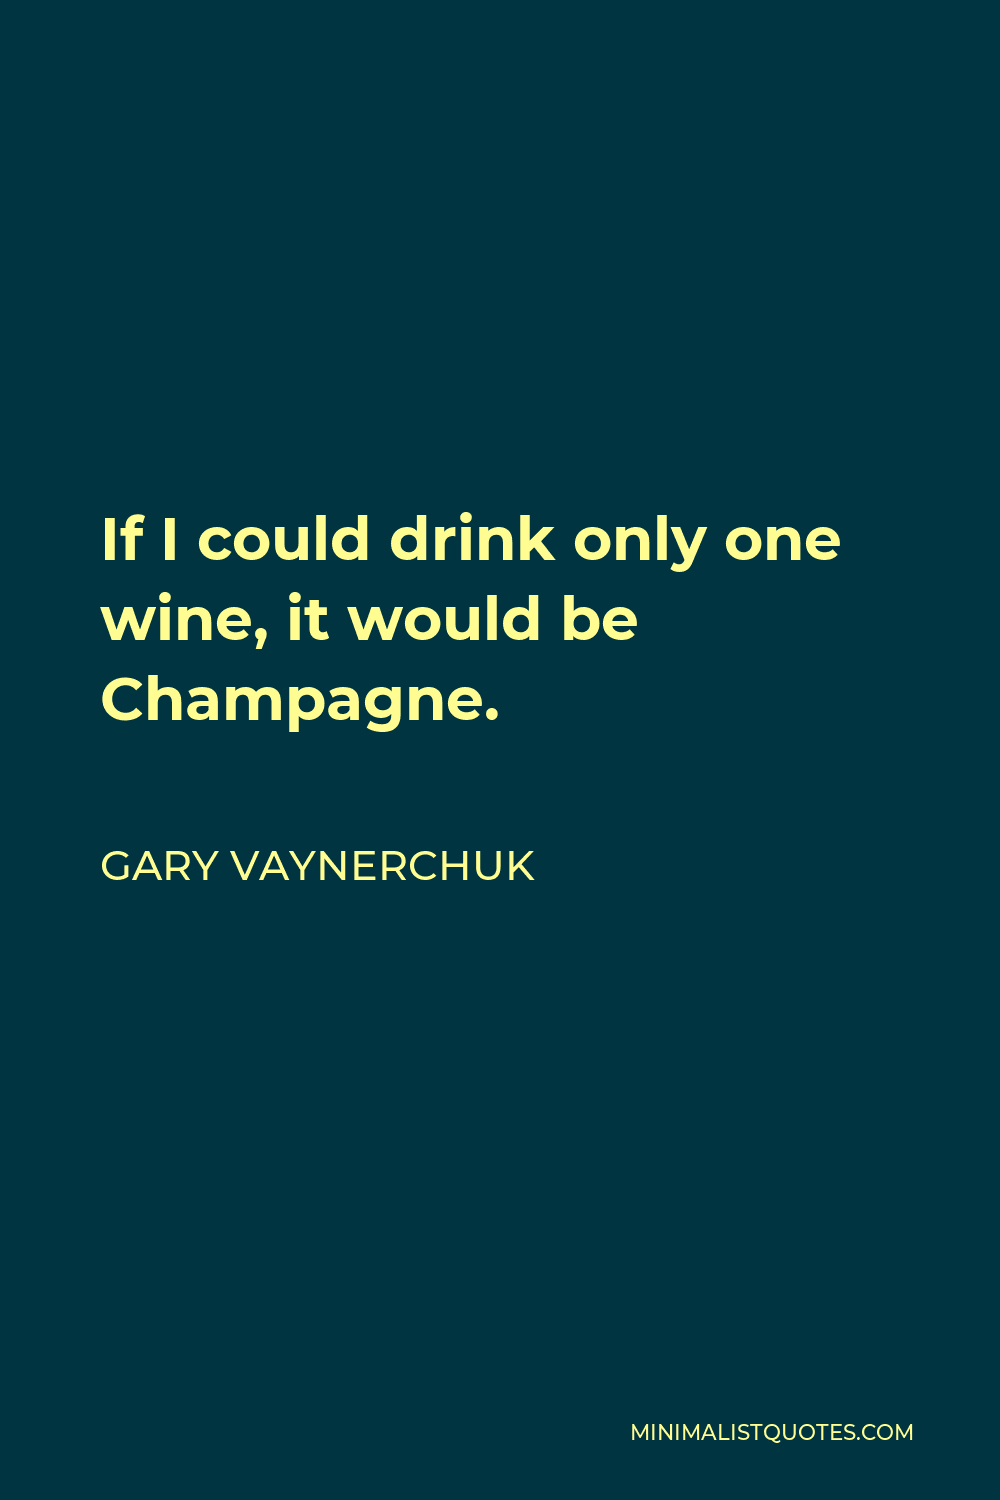 Gary Vaynerchuk Quote - If I could drink only one wine, it would be Champagne.